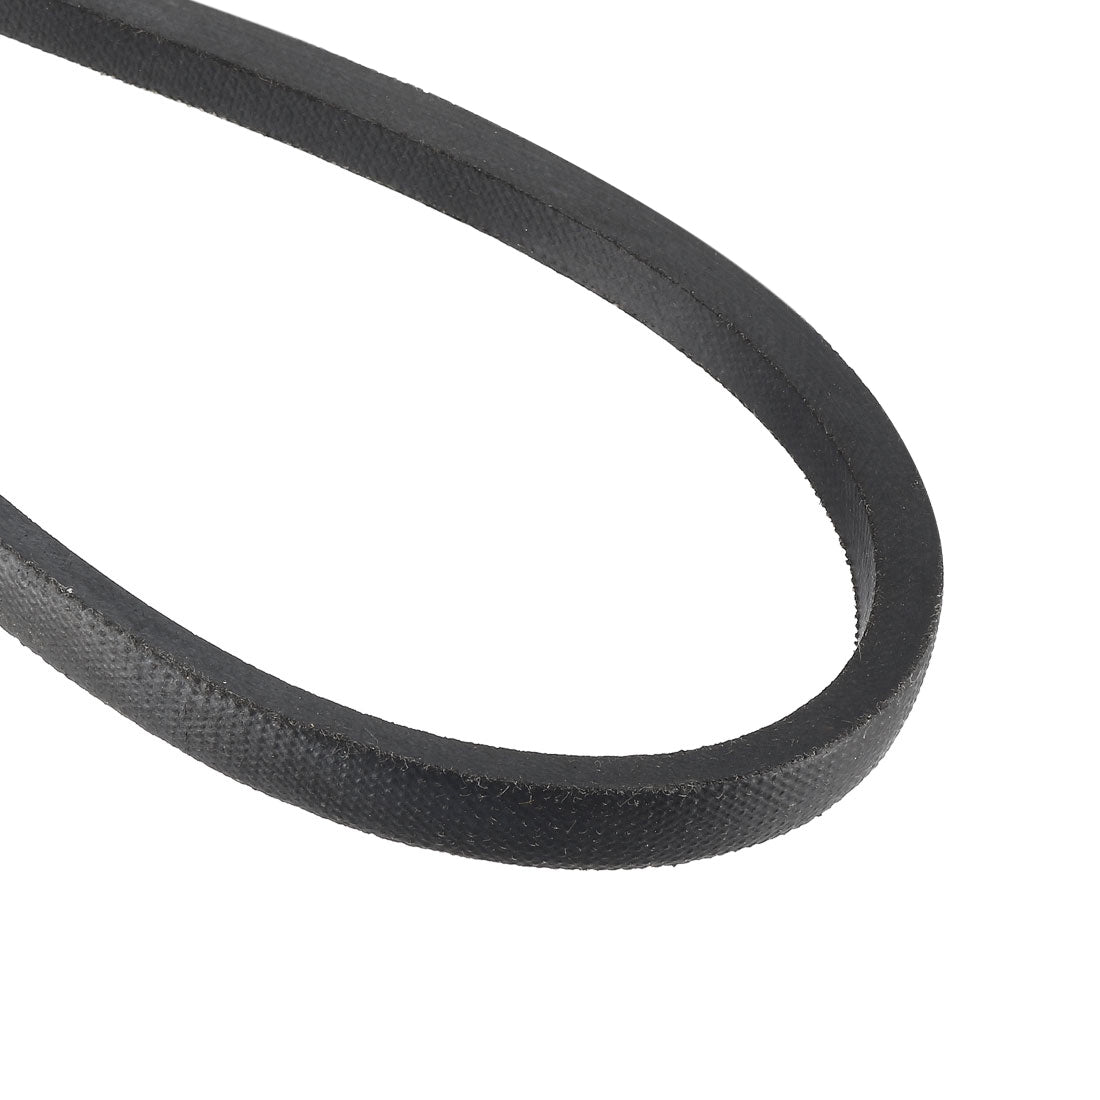 Uxcell Uxcell A991/A39 V-Belts 39" Inner Girth, A-Section Rubber Drive Belt 2pcs